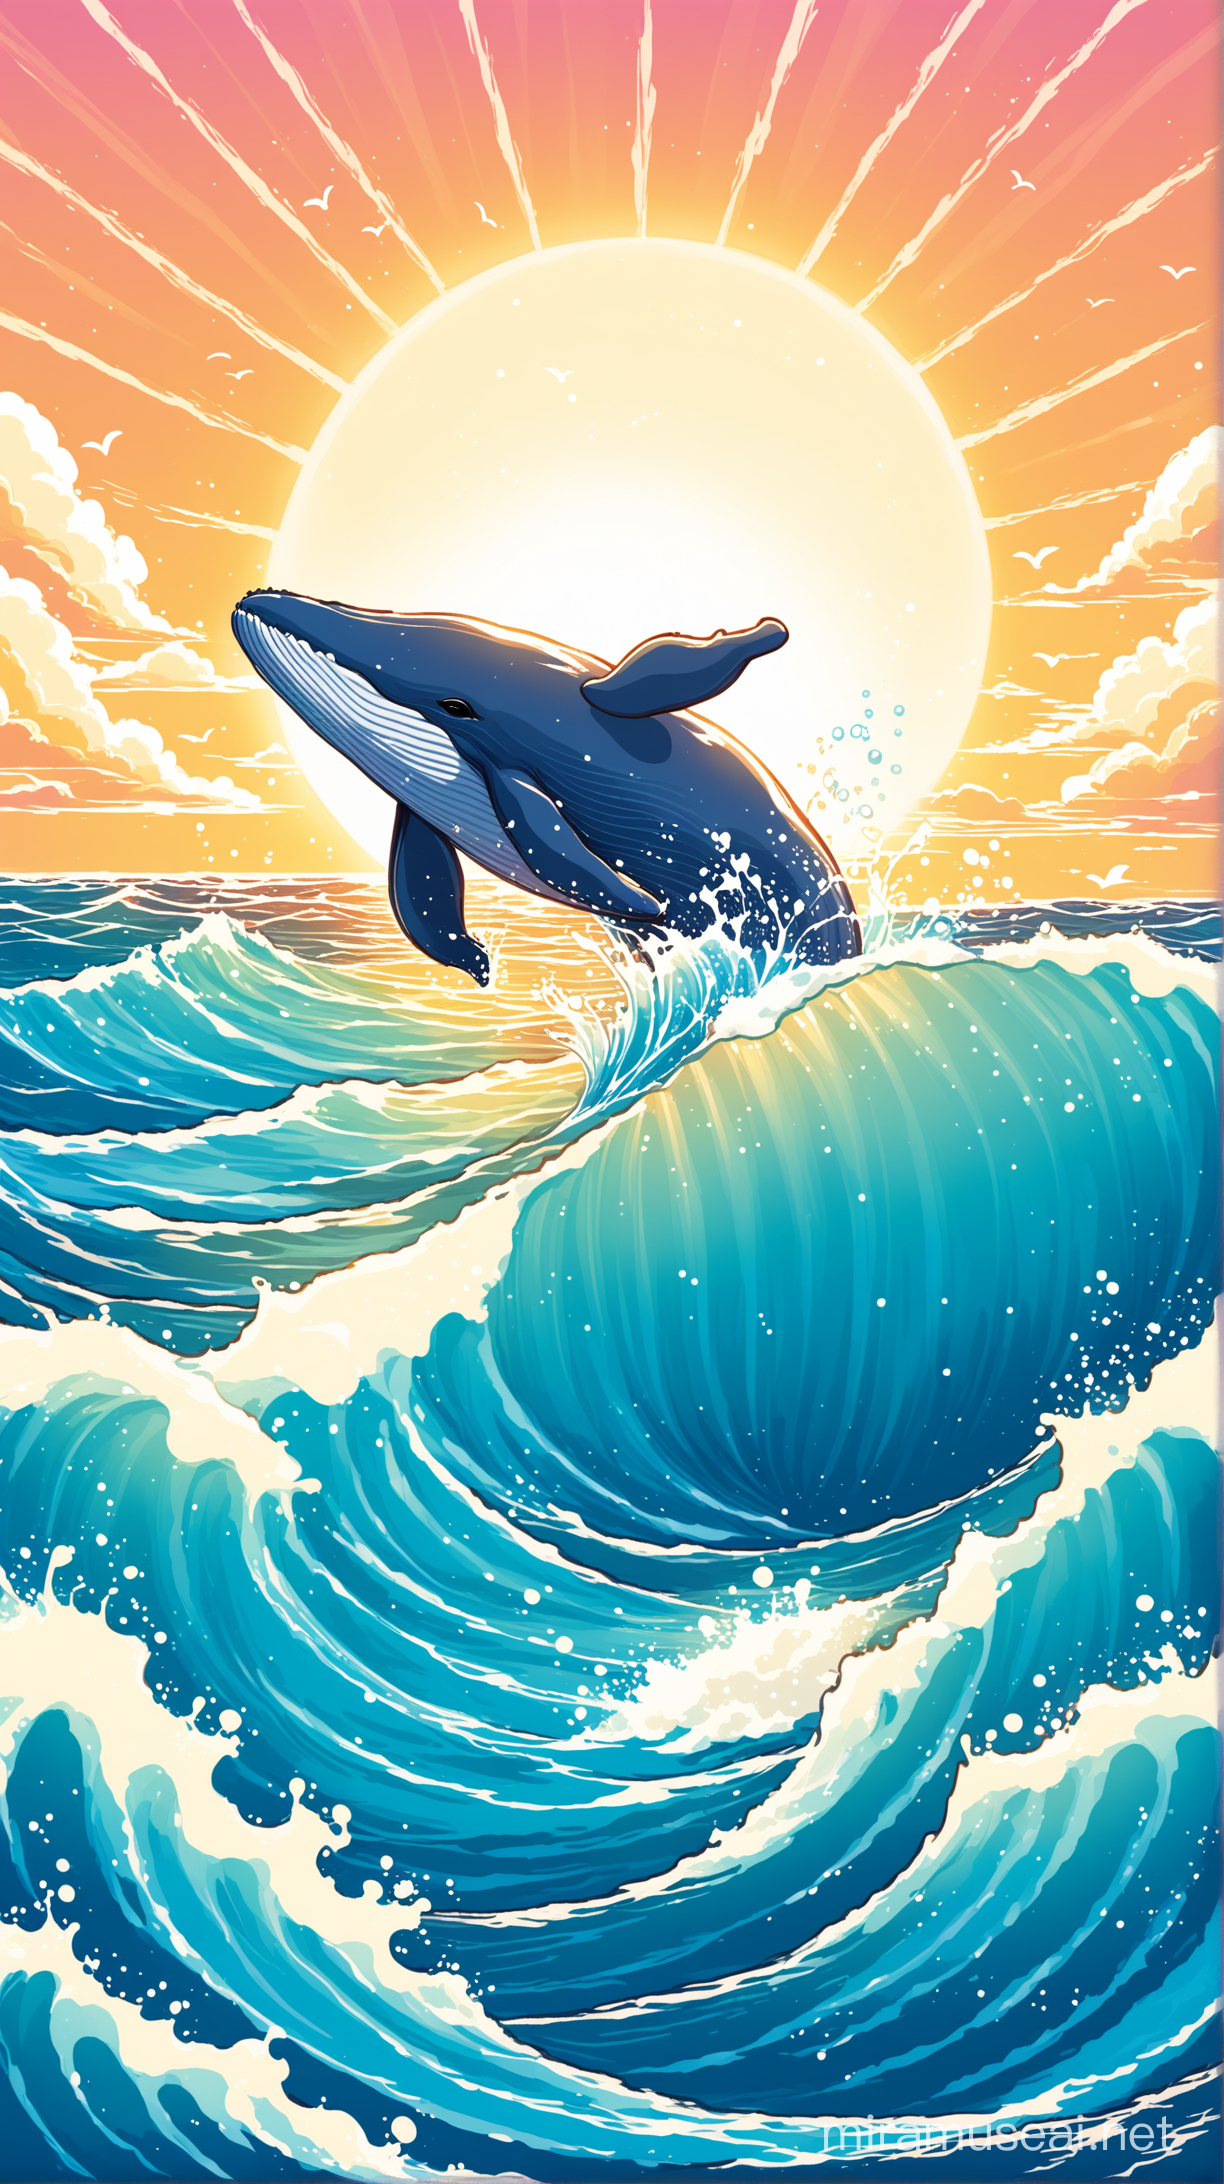 Create a kids illustration,A whale jumps out of the ocean, splashing water, in front of a sun and waves. The whale is blue. 